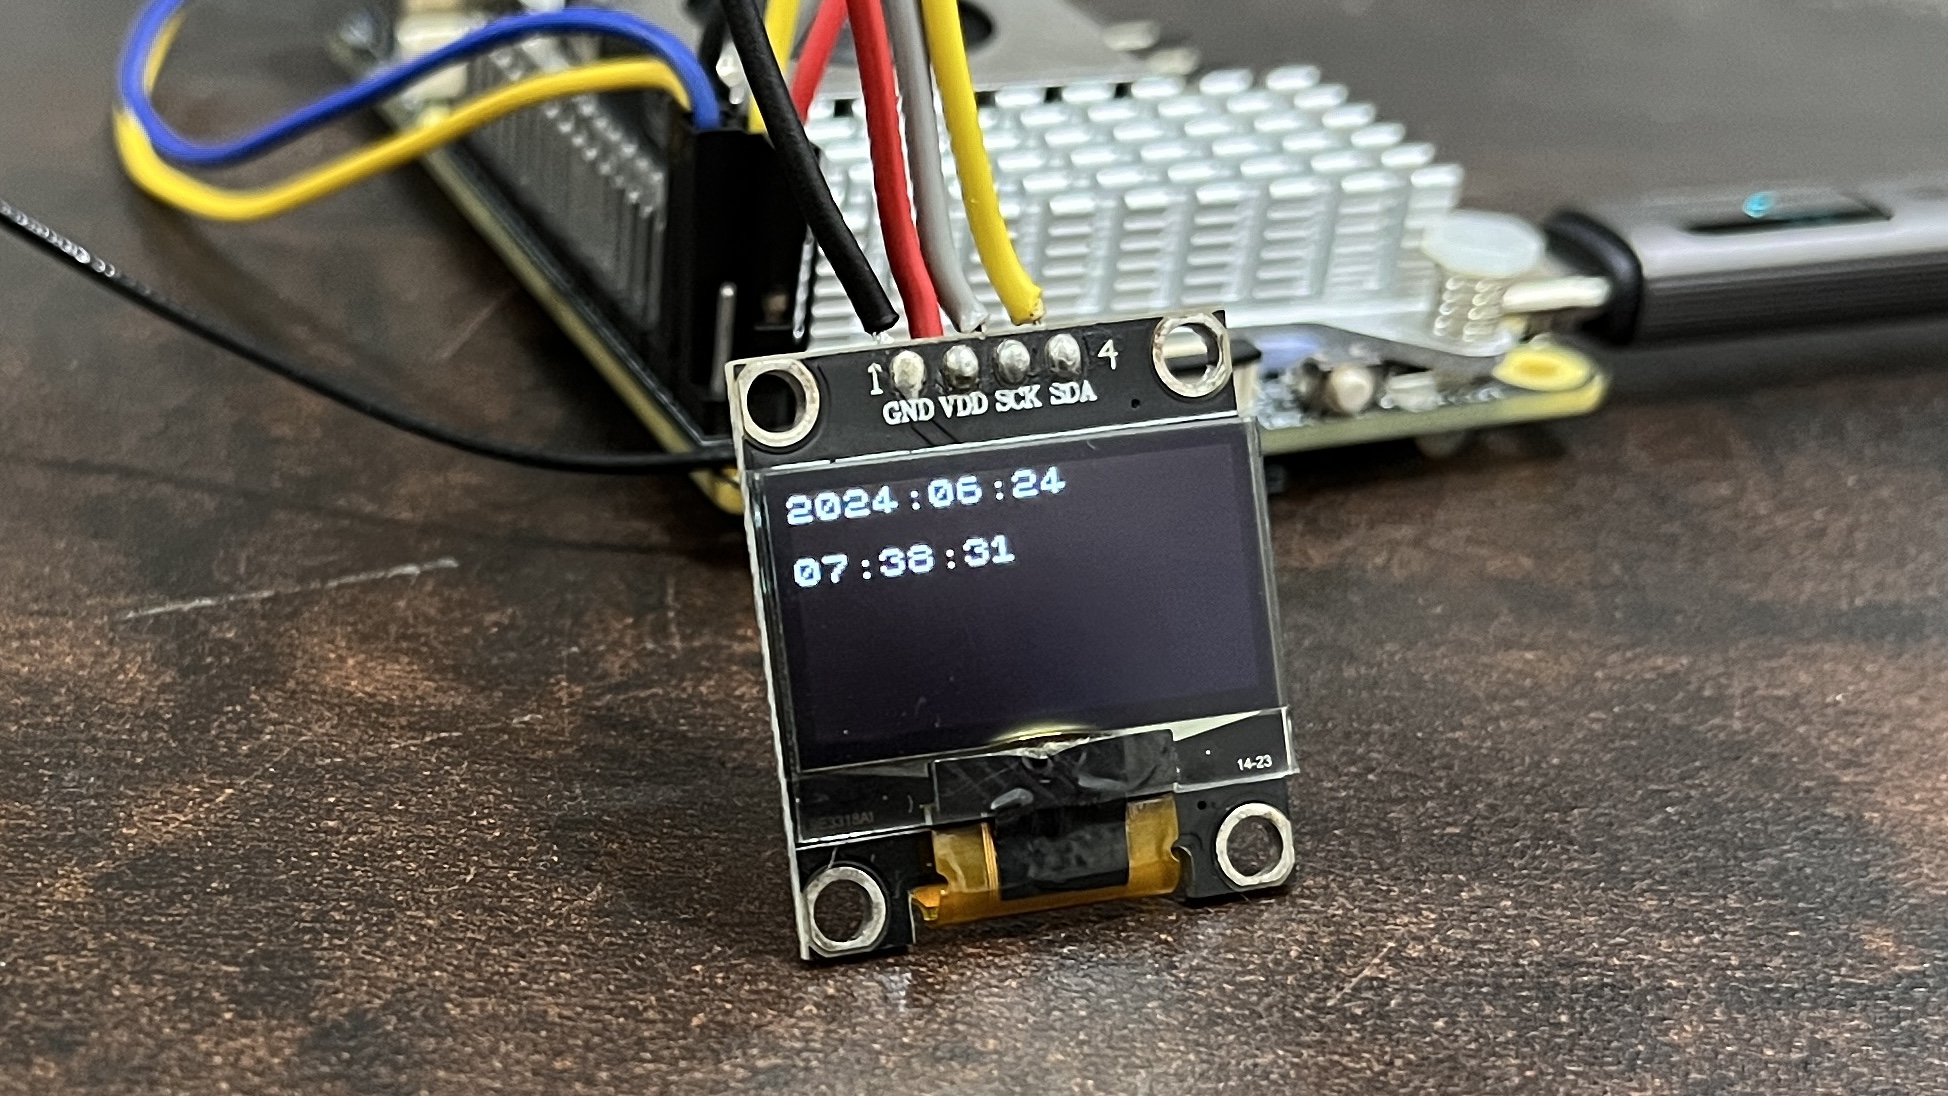 Date & Time on 128x64 OLED